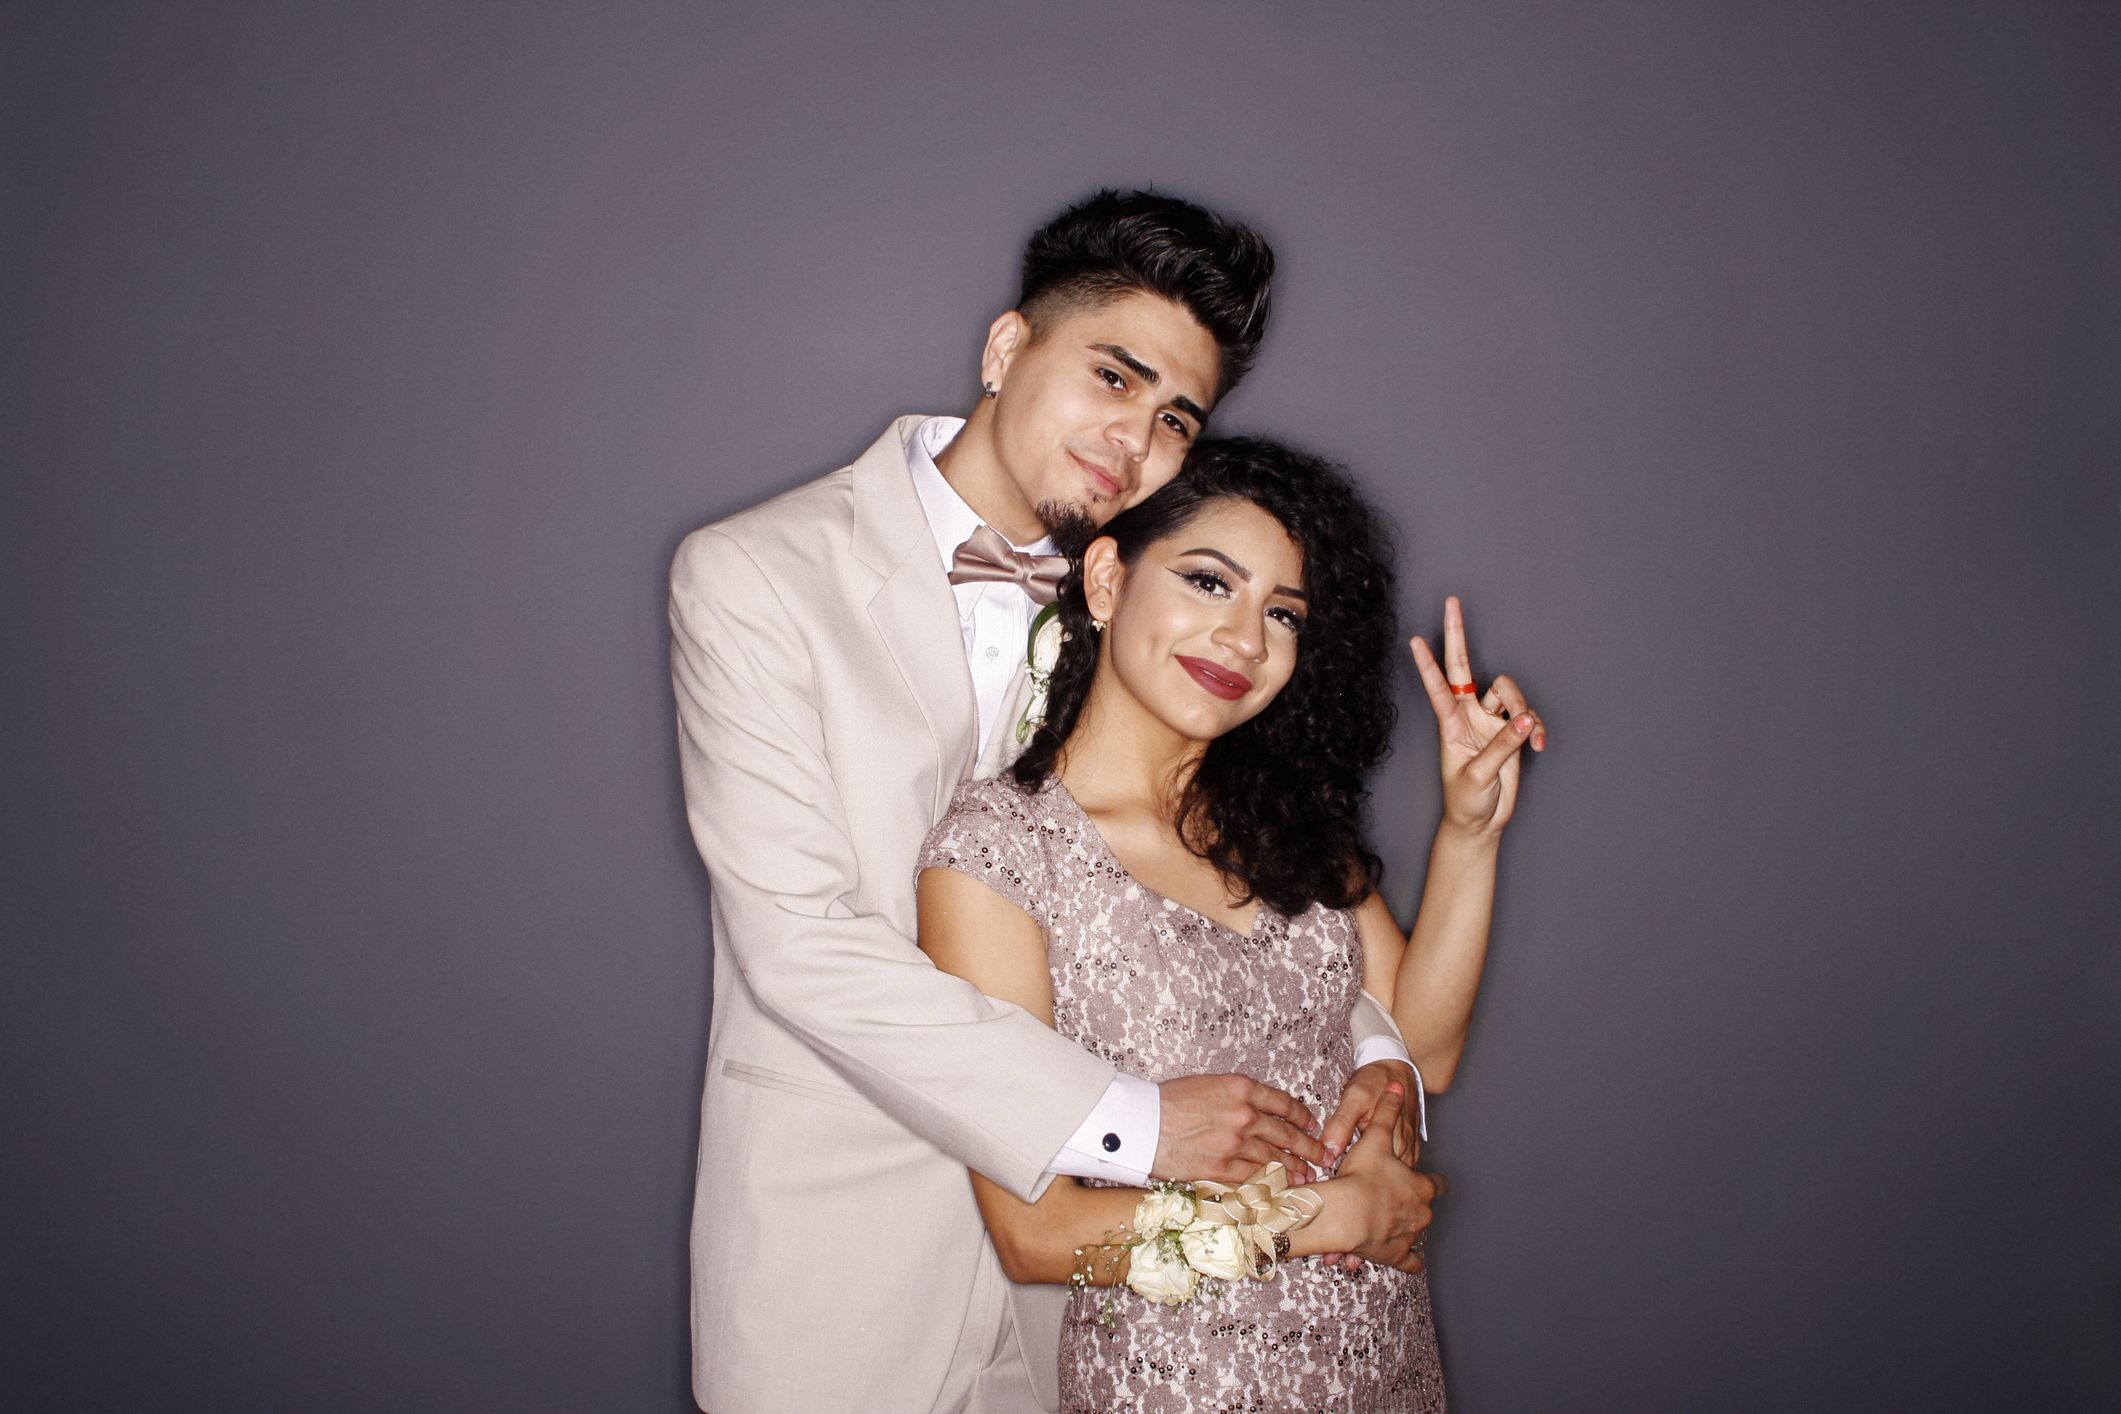 couple at prom giving peace sign royalty free image 1682538507